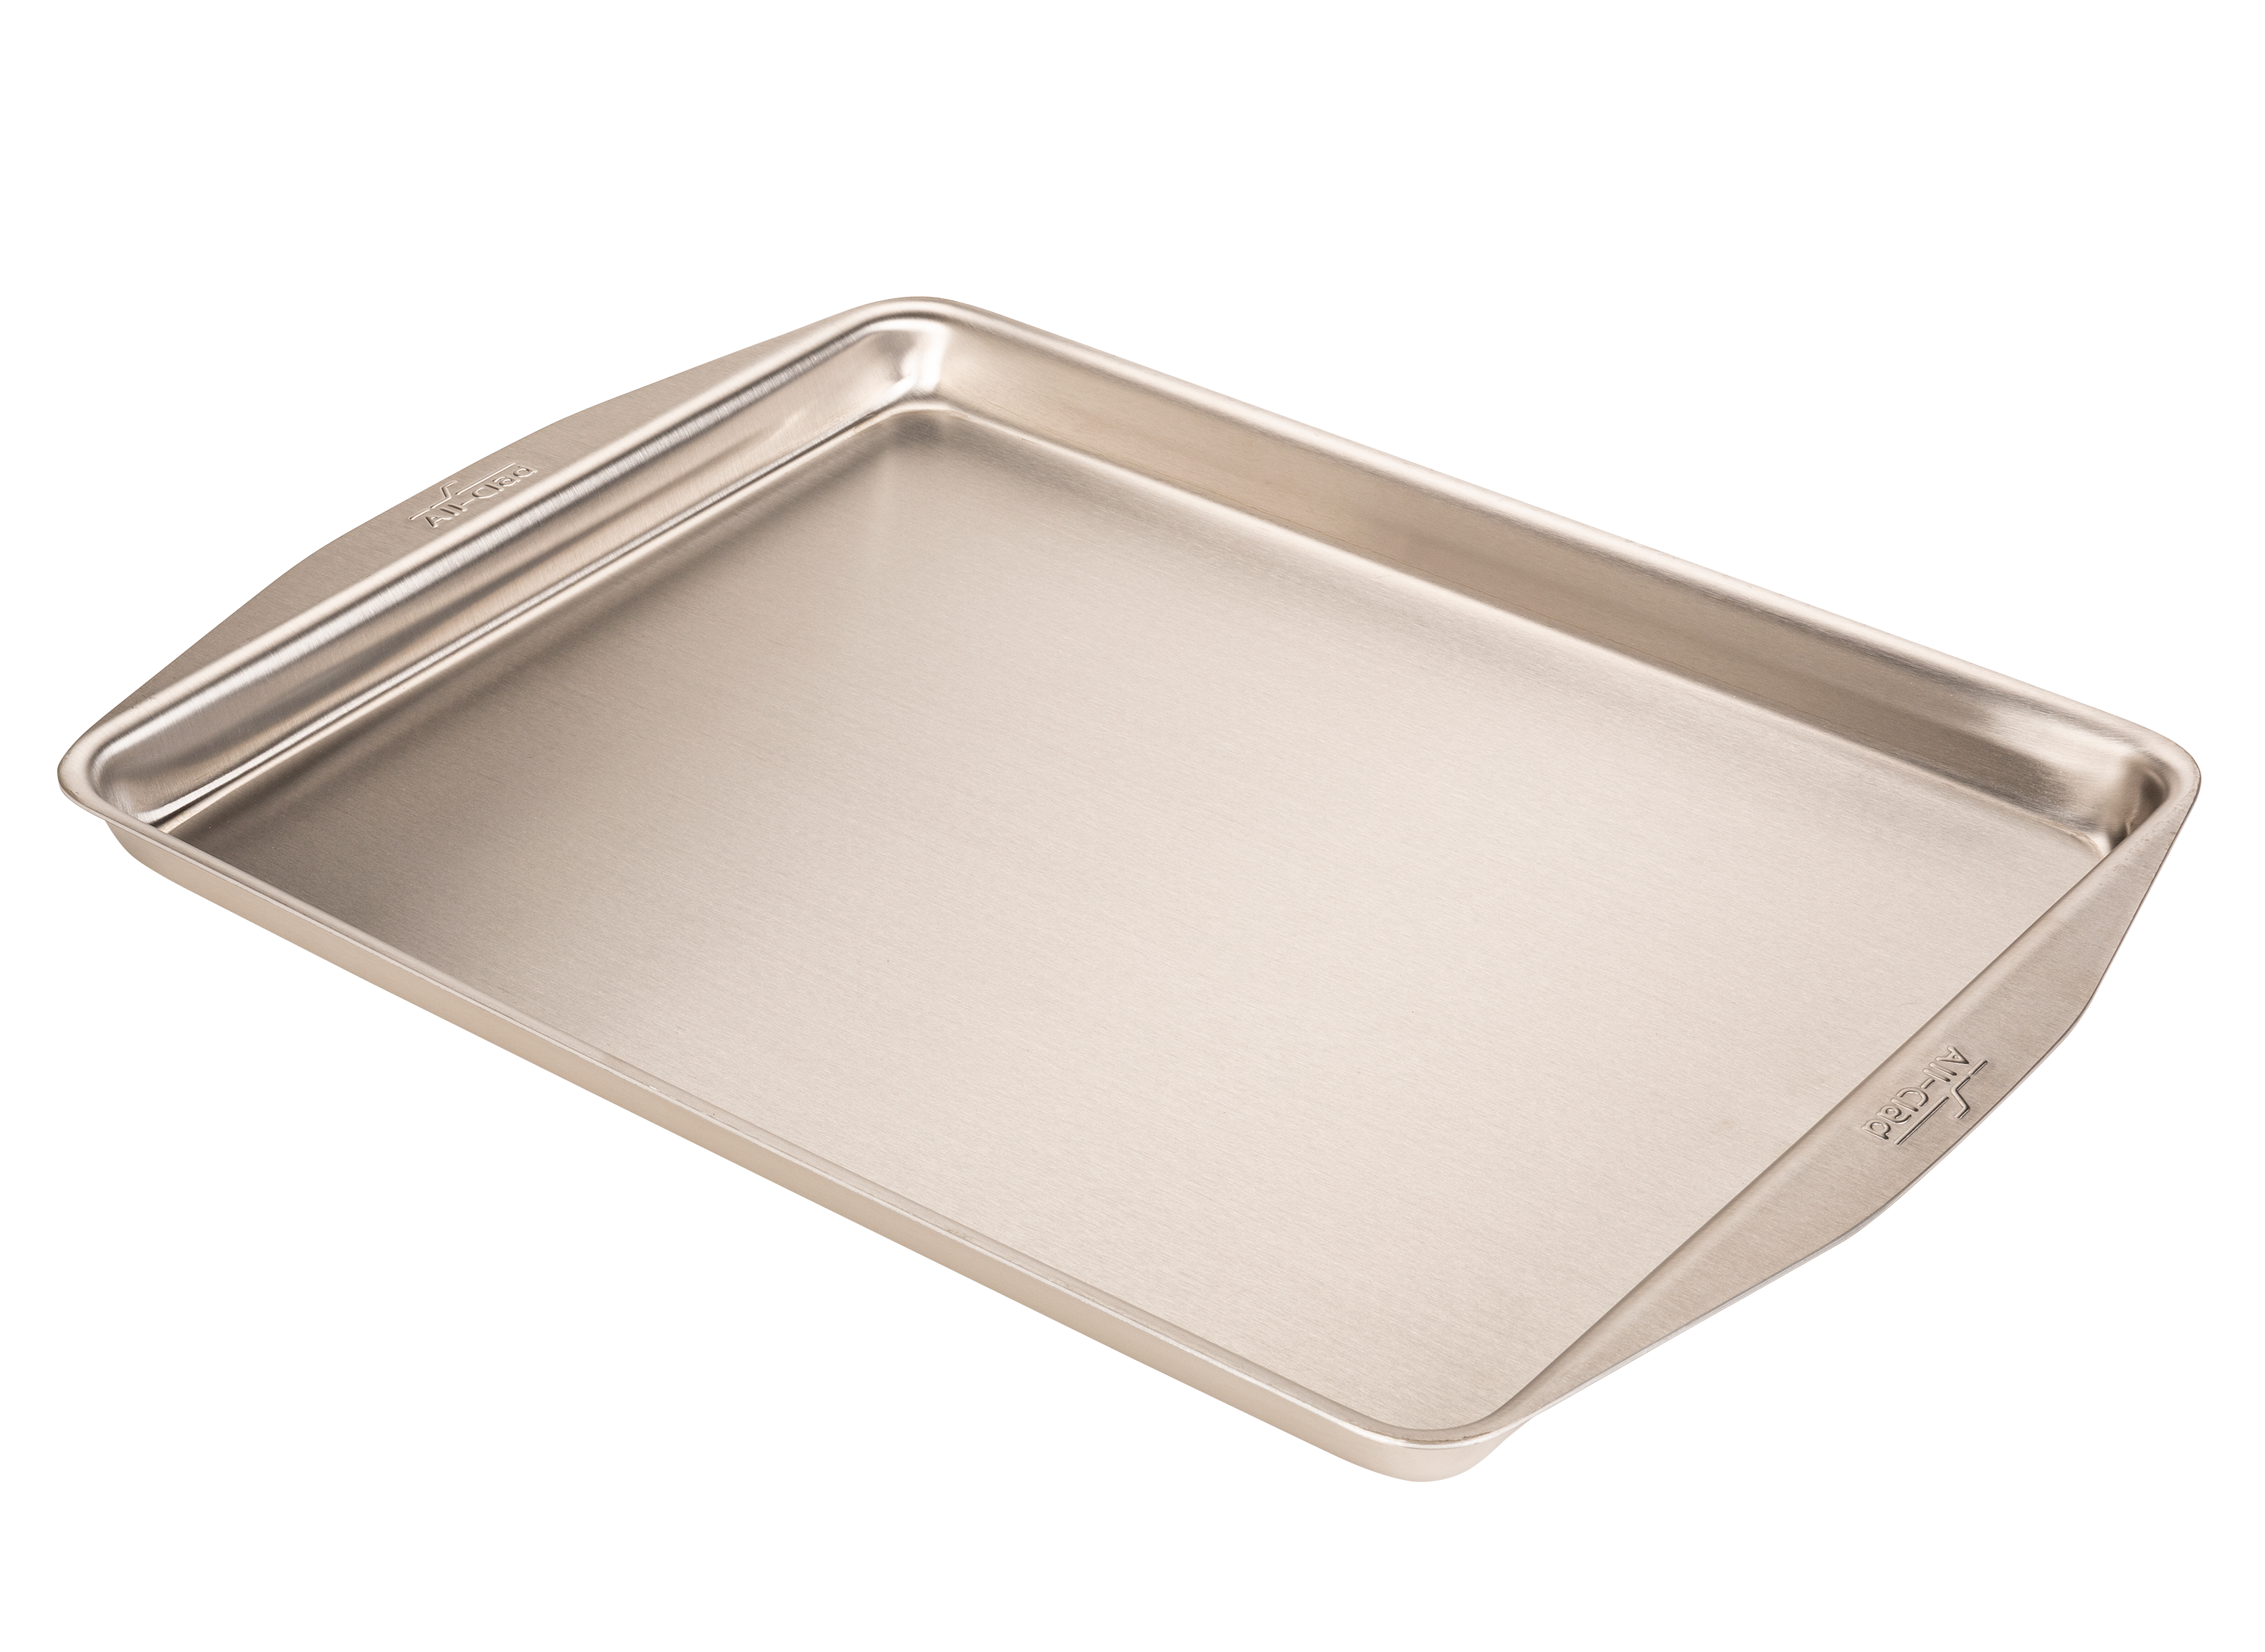 All-Clad D3 Stainless Jelly Roll Pan Bakeware Review - Consumer Reports